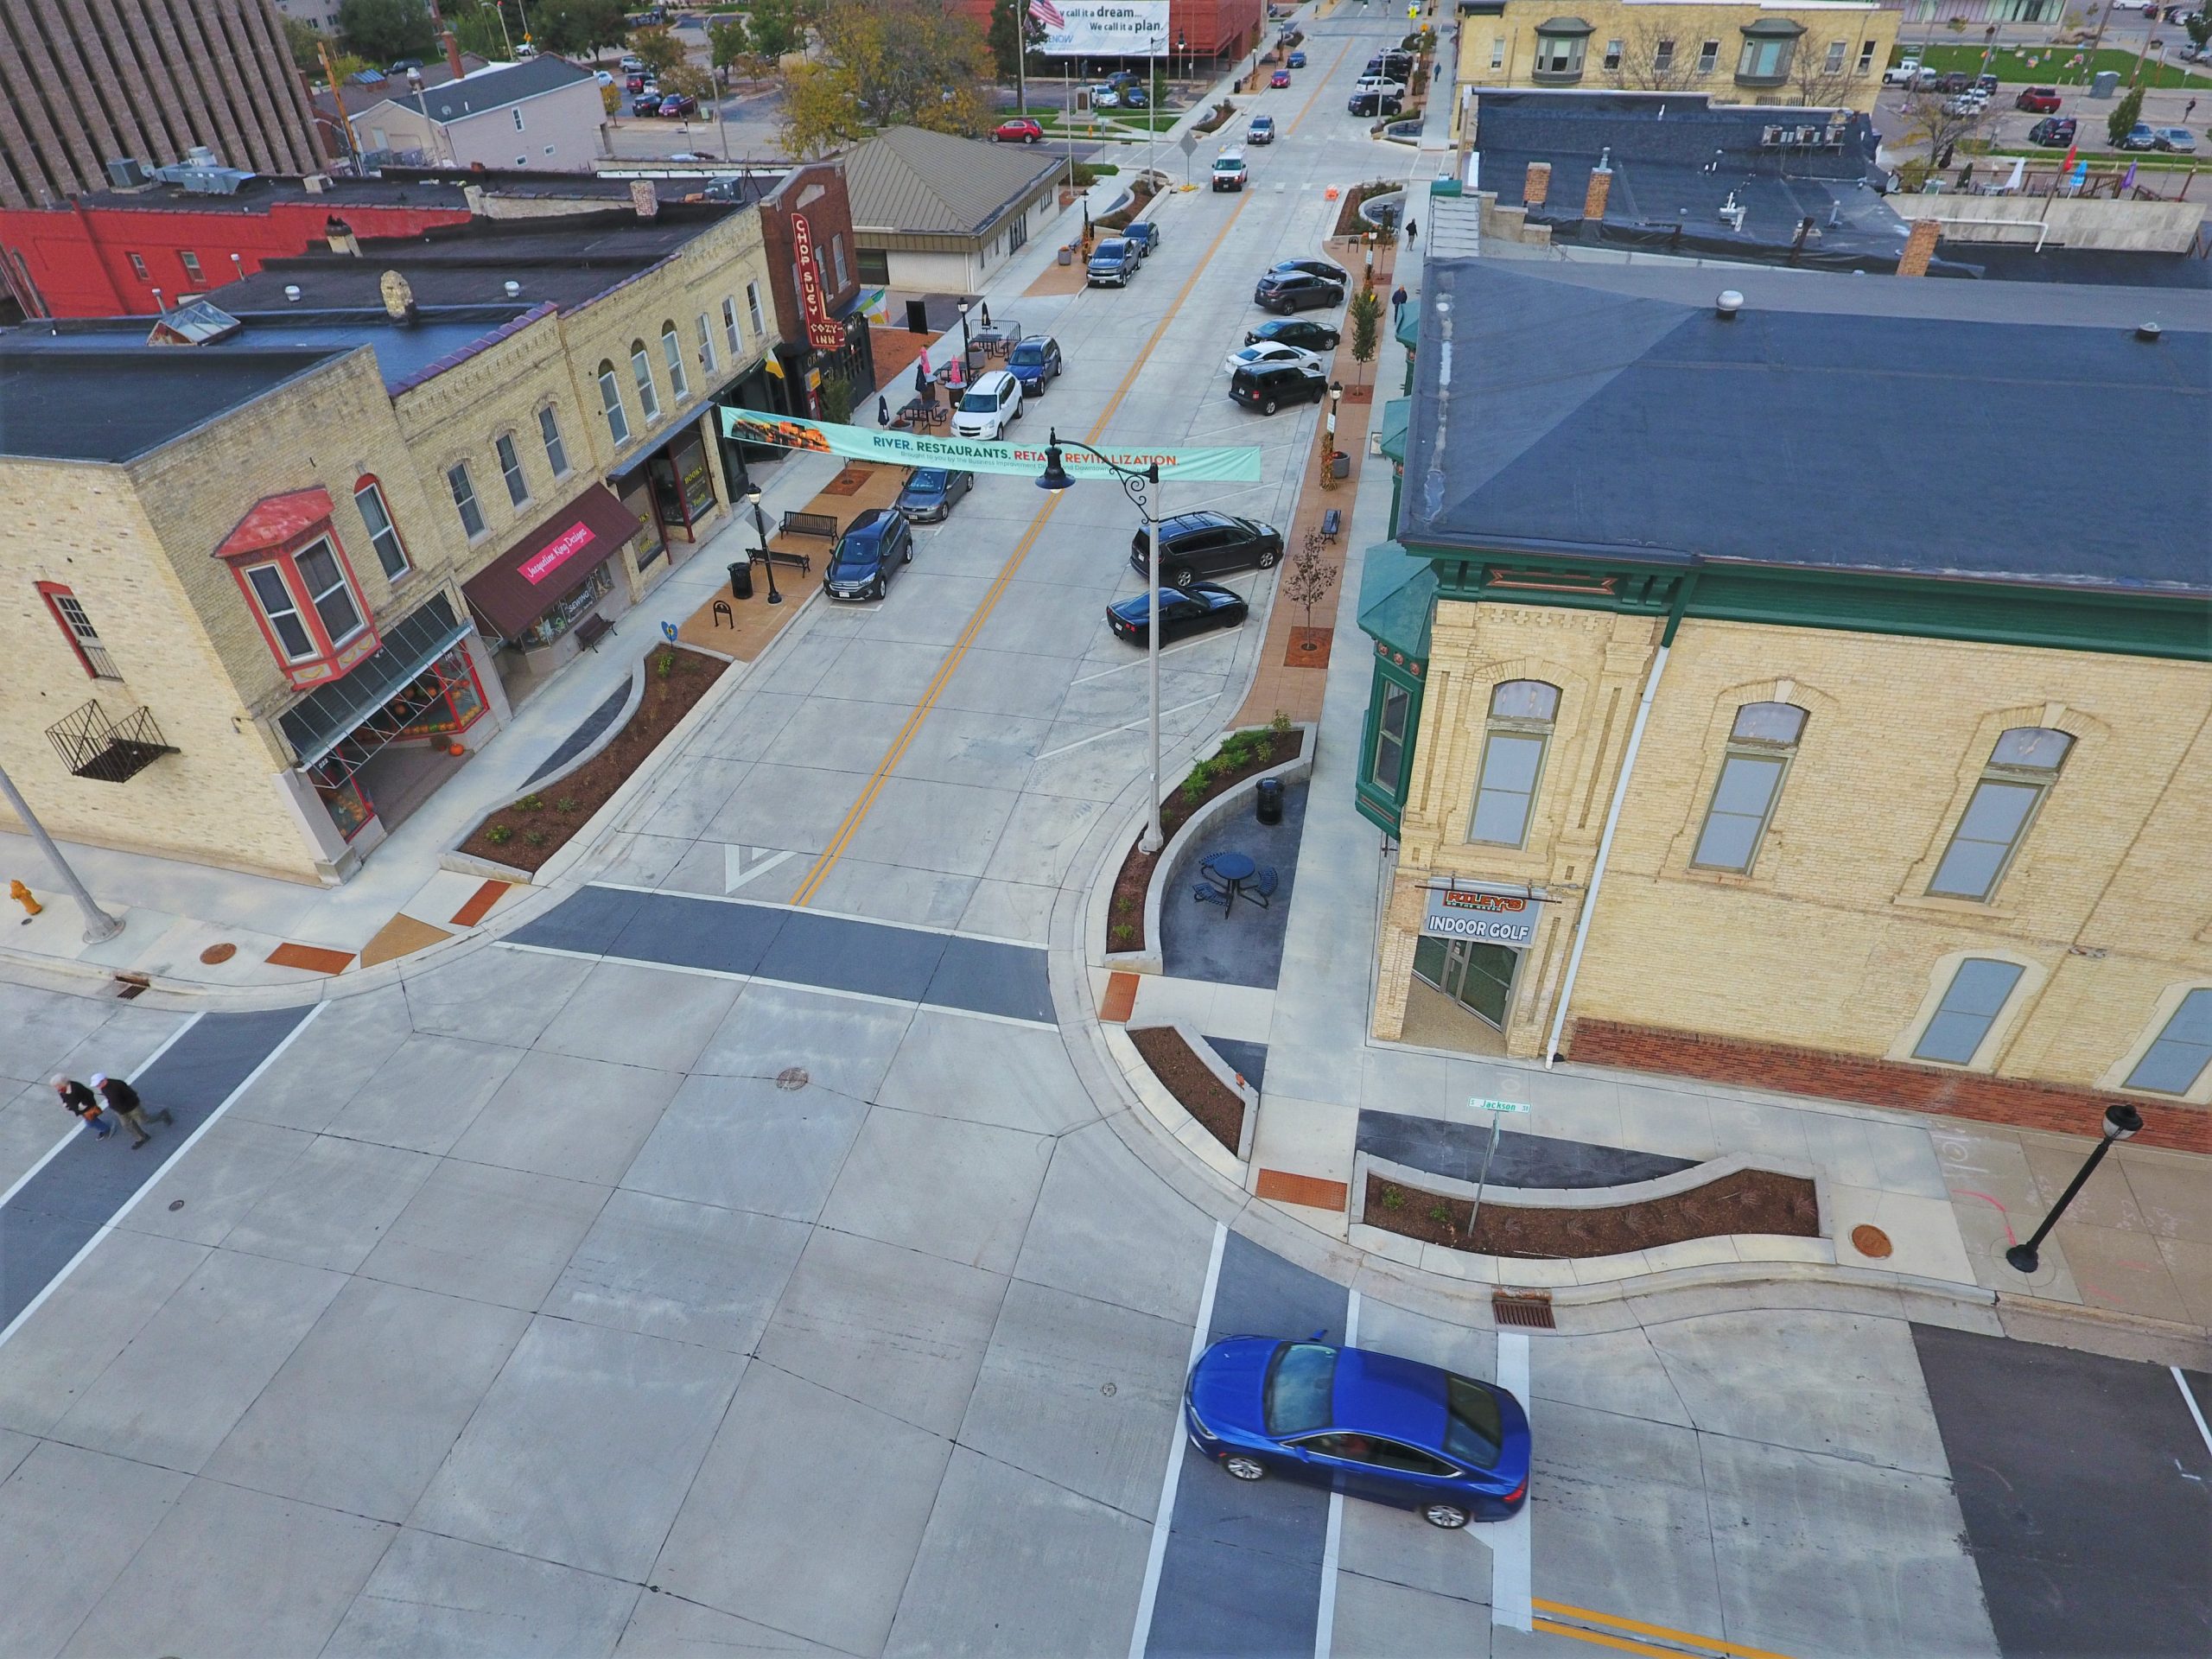 View of elegant C-shaped raised concrete planters as part of the reconstruction of West Milwaukee Street in downtown Janesville, Wisconsin.